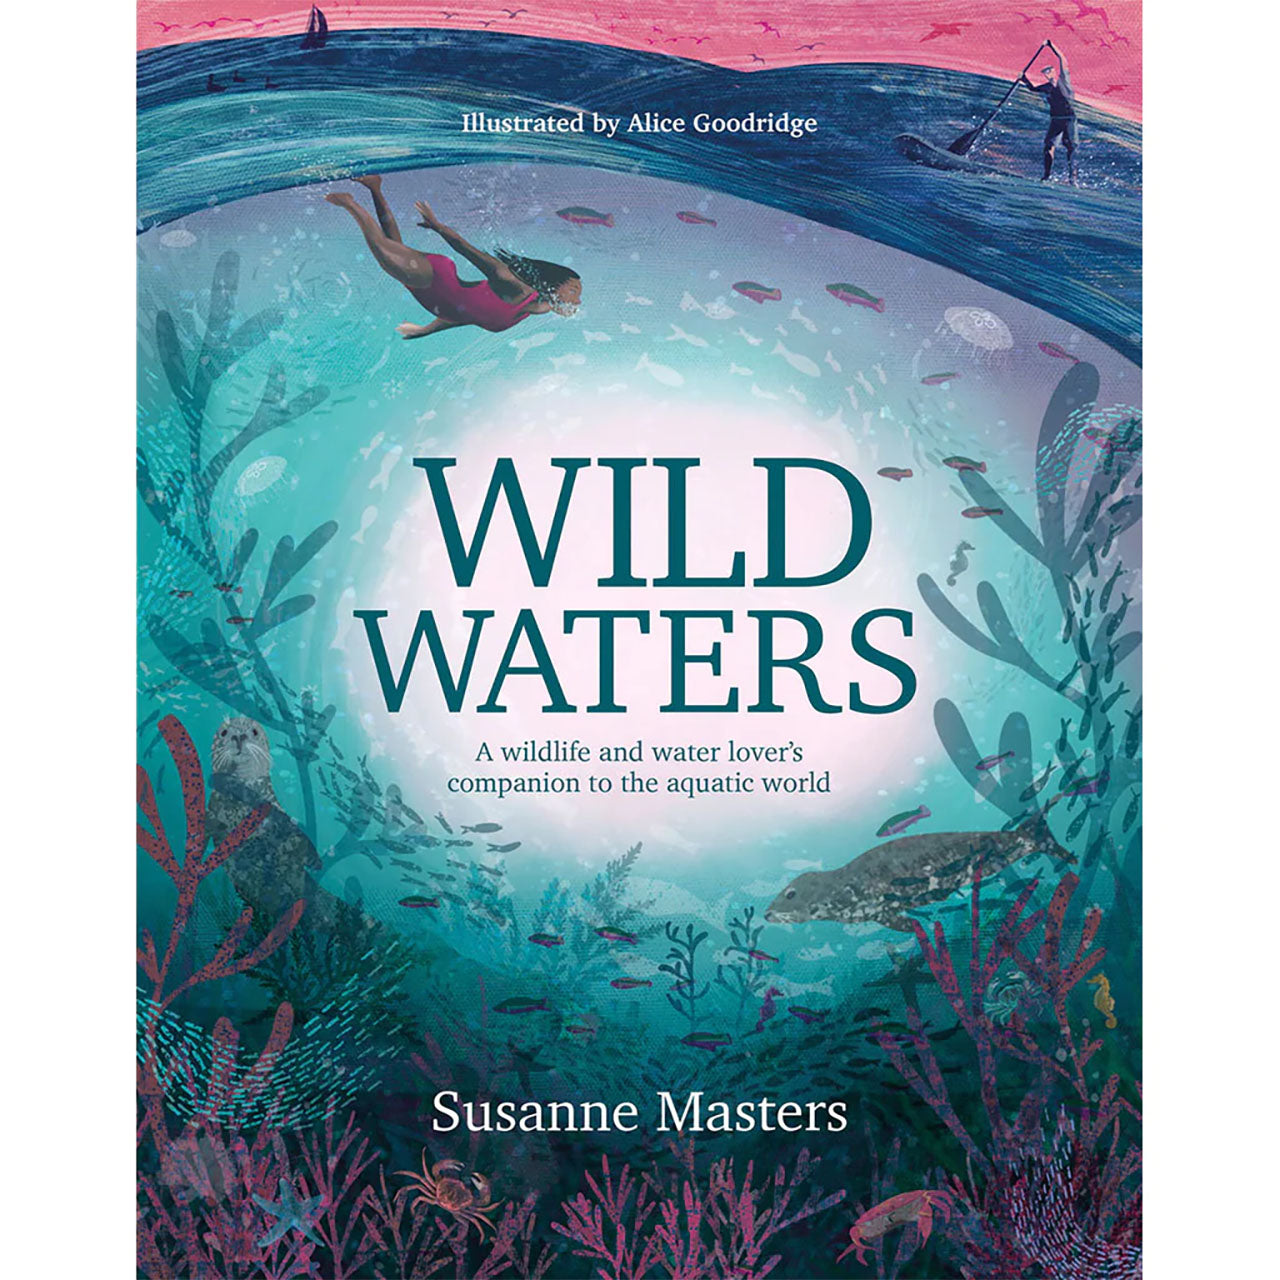 Wild Waters by Susanne Masters